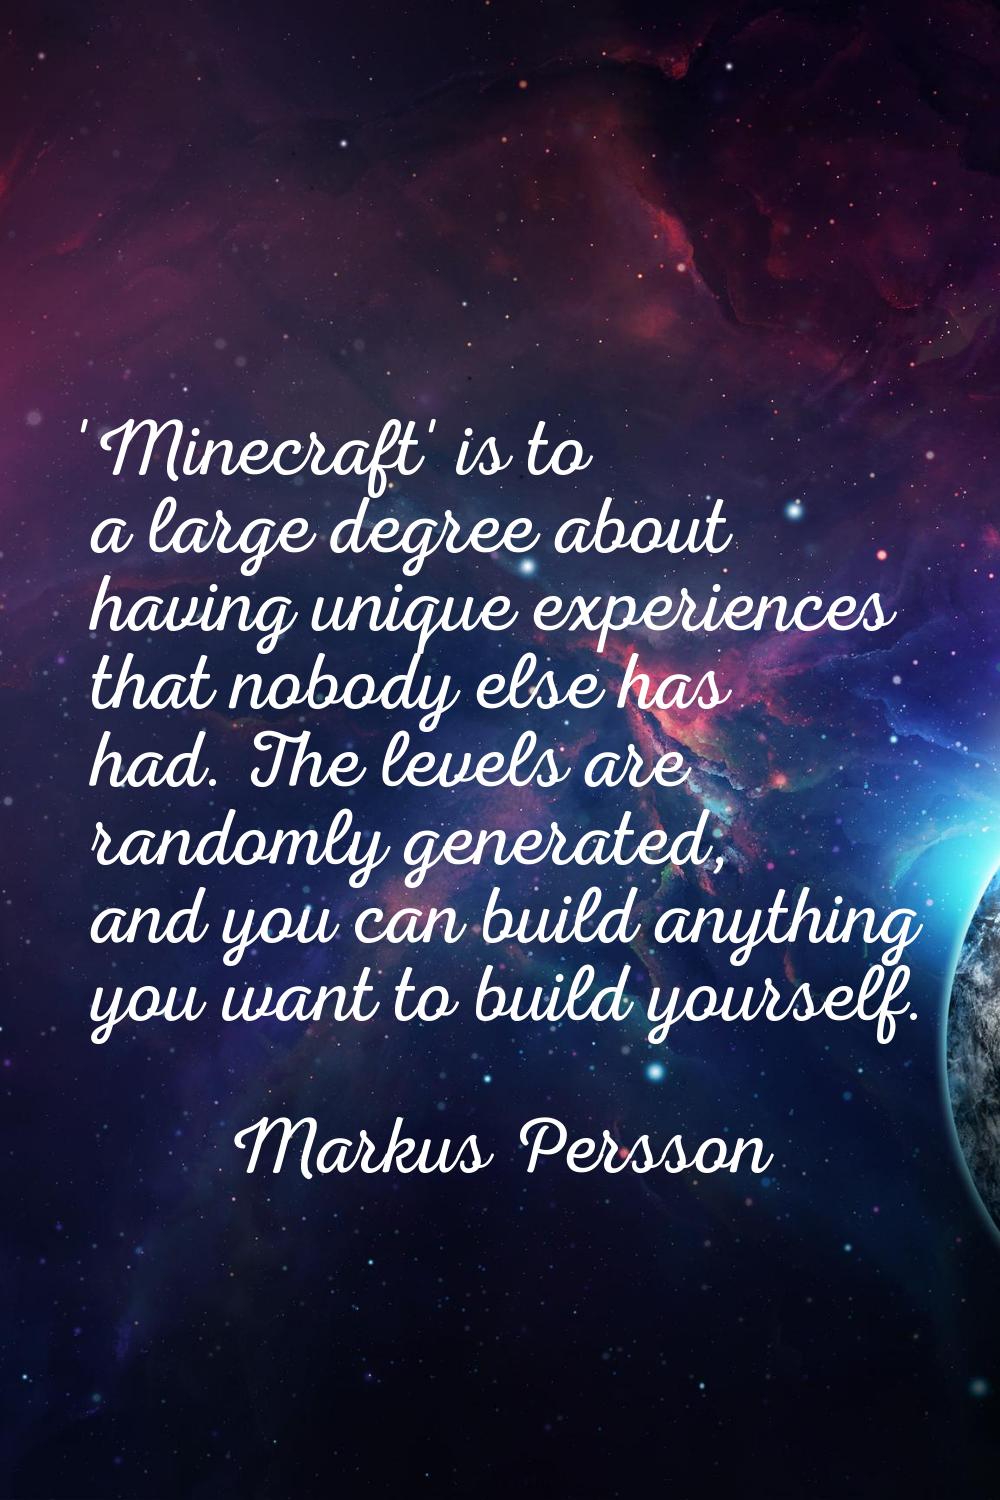 'Minecraft' is to a large degree about having unique experiences that nobody else has had. The leve